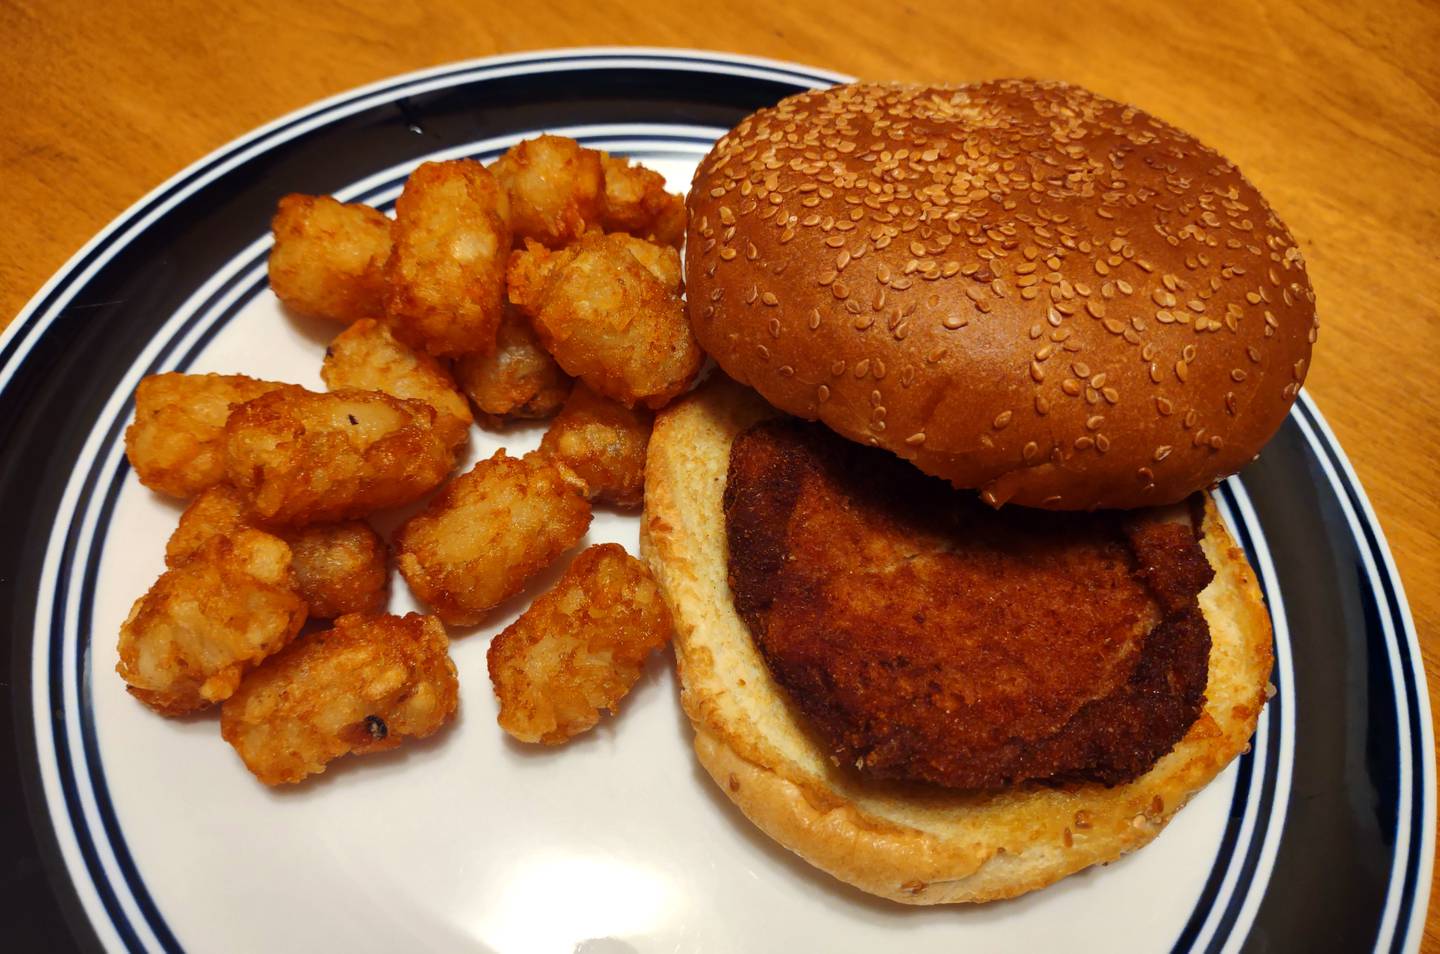 One of the sandwiches on Ziggy's Bar & Grill menu is the breaded pork chop, which is served with fries or tater tots.